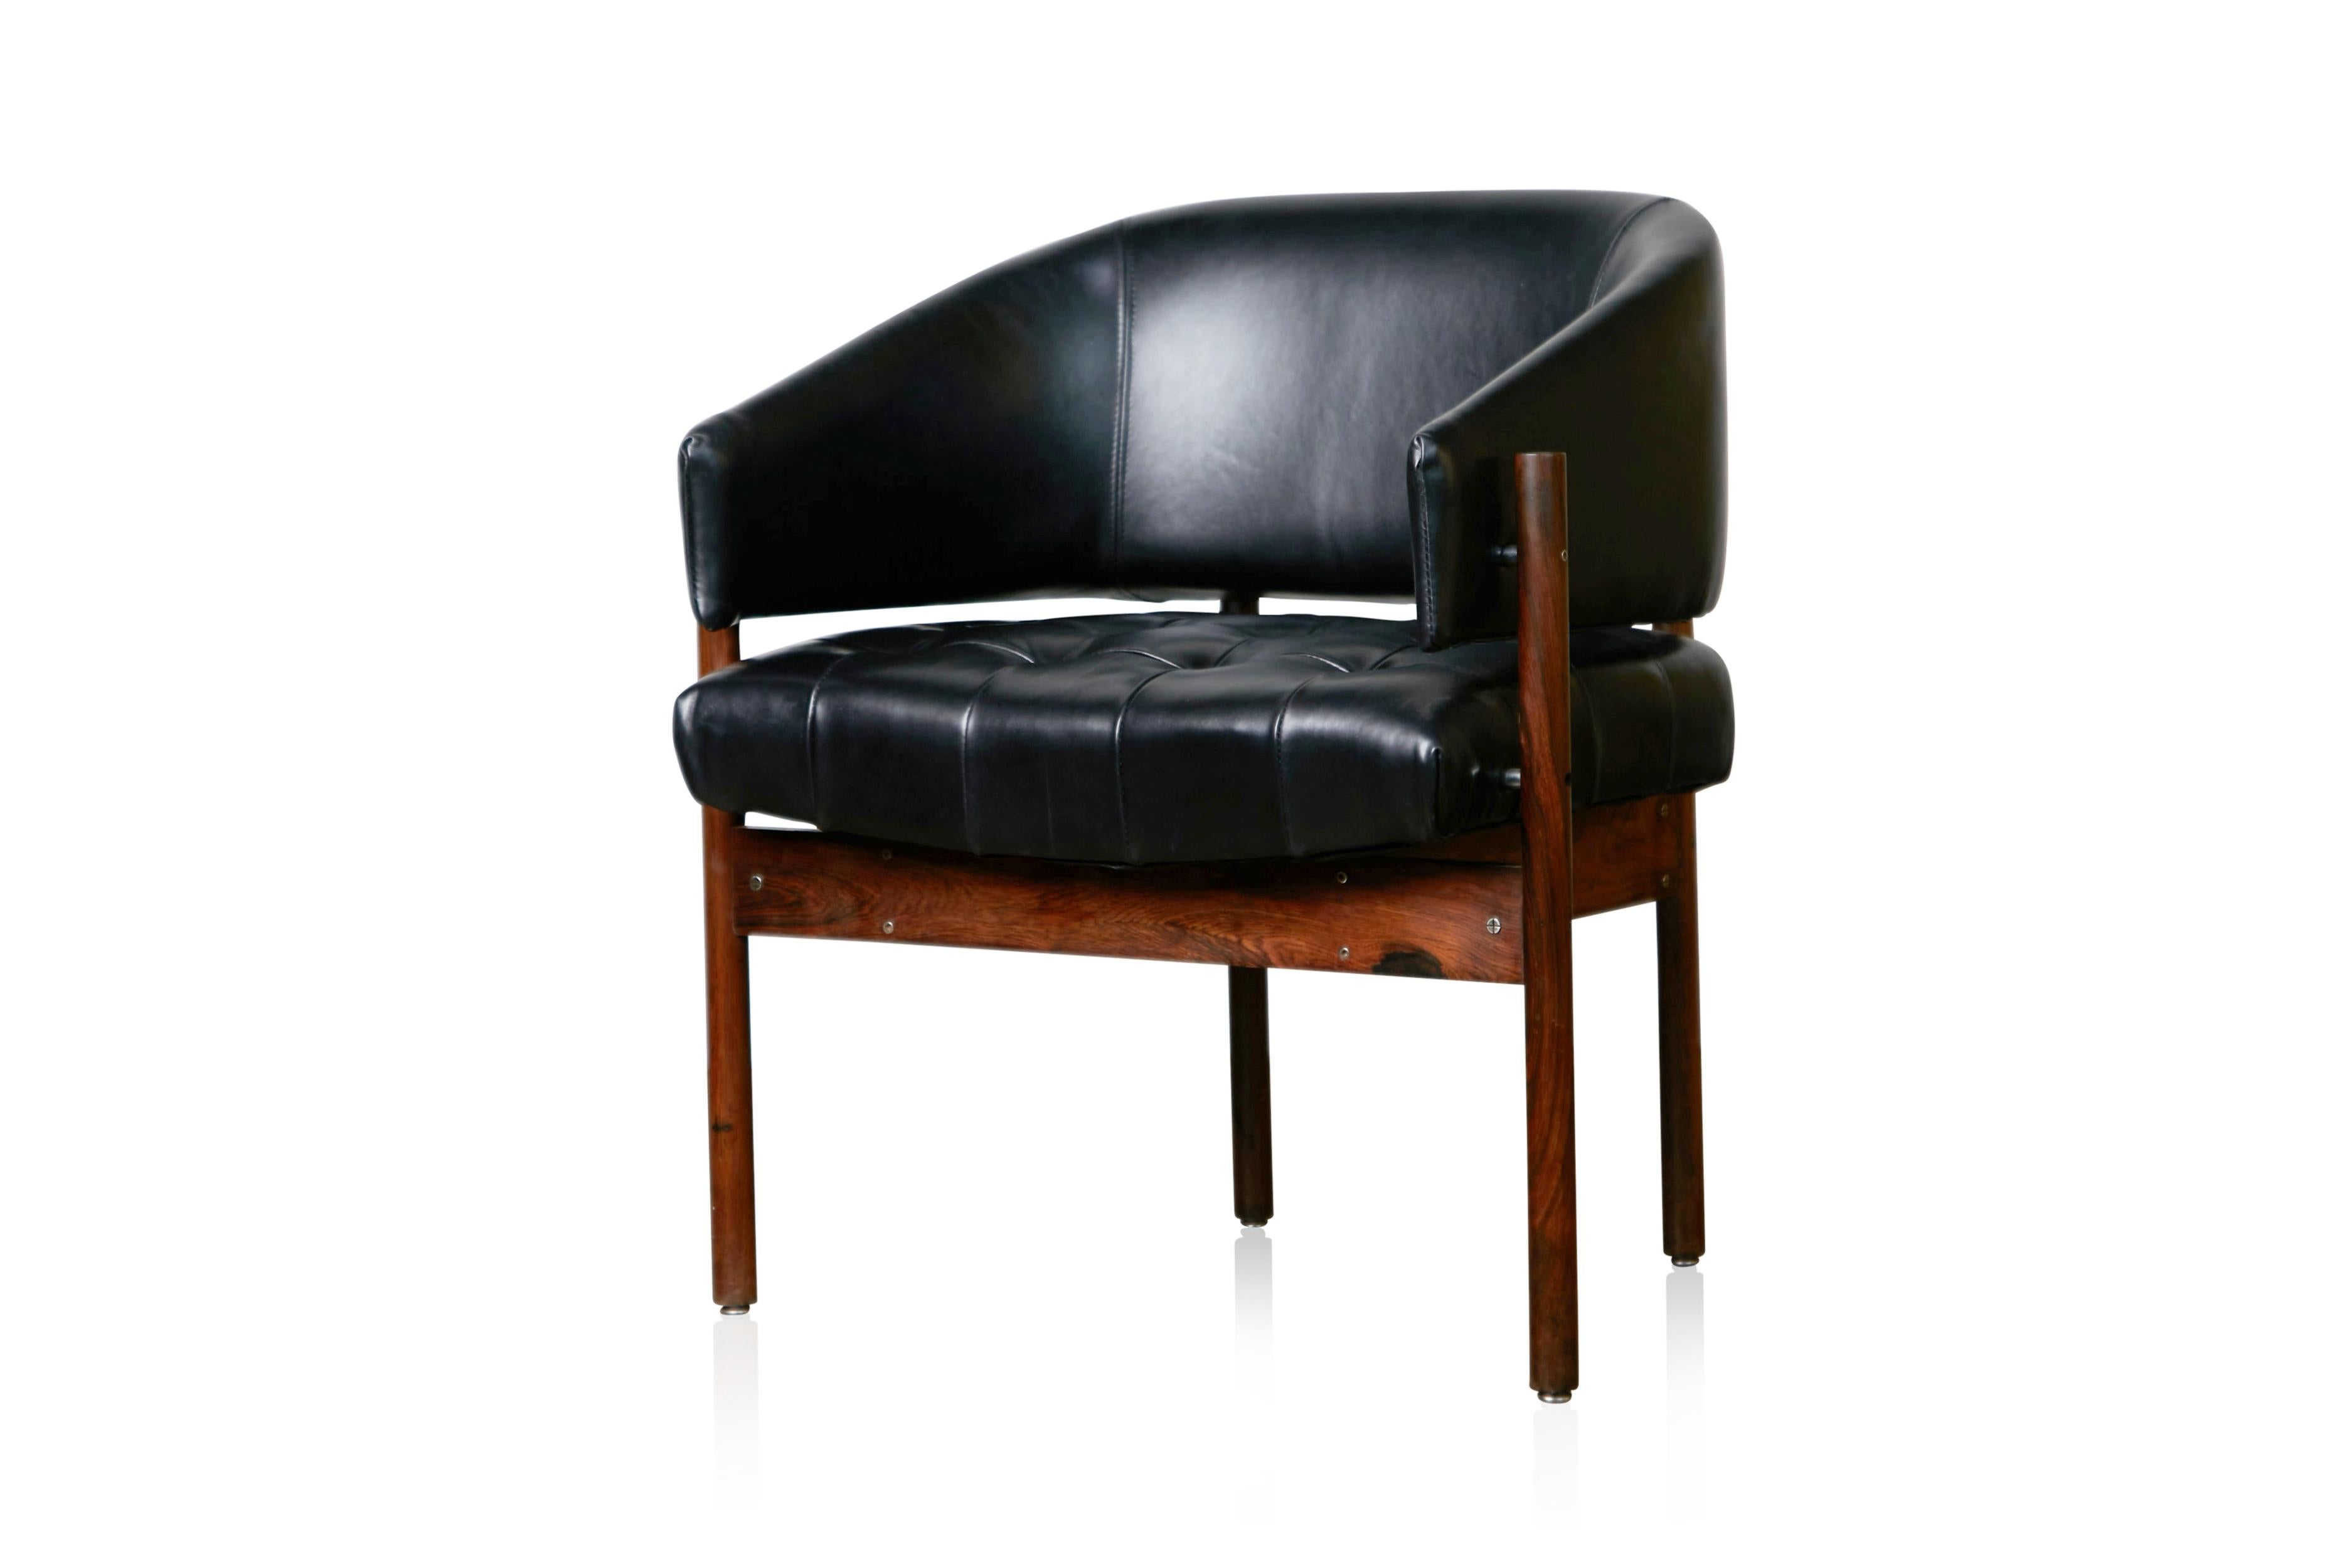 Jorge Zalszupin 'Senior' Rosewood & Leather Armchairs, Produced in 1972, Brazil 2